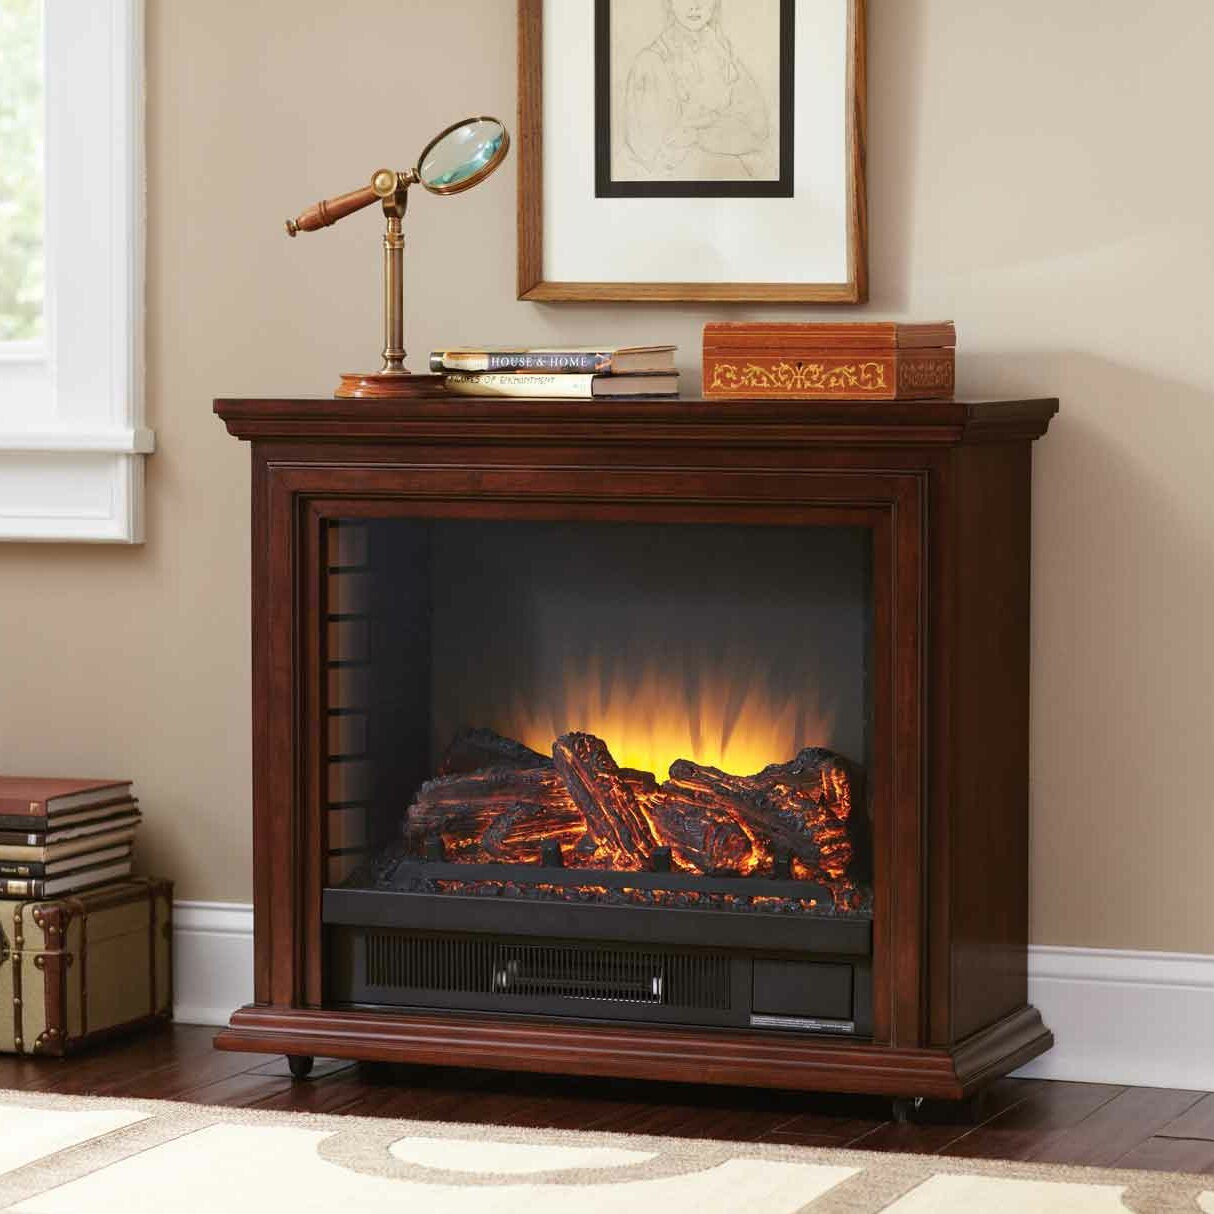 Pleasant Hearth Electric Fireplace
 Pleasant Hearth Mobile Electric Fireplace & Reviews